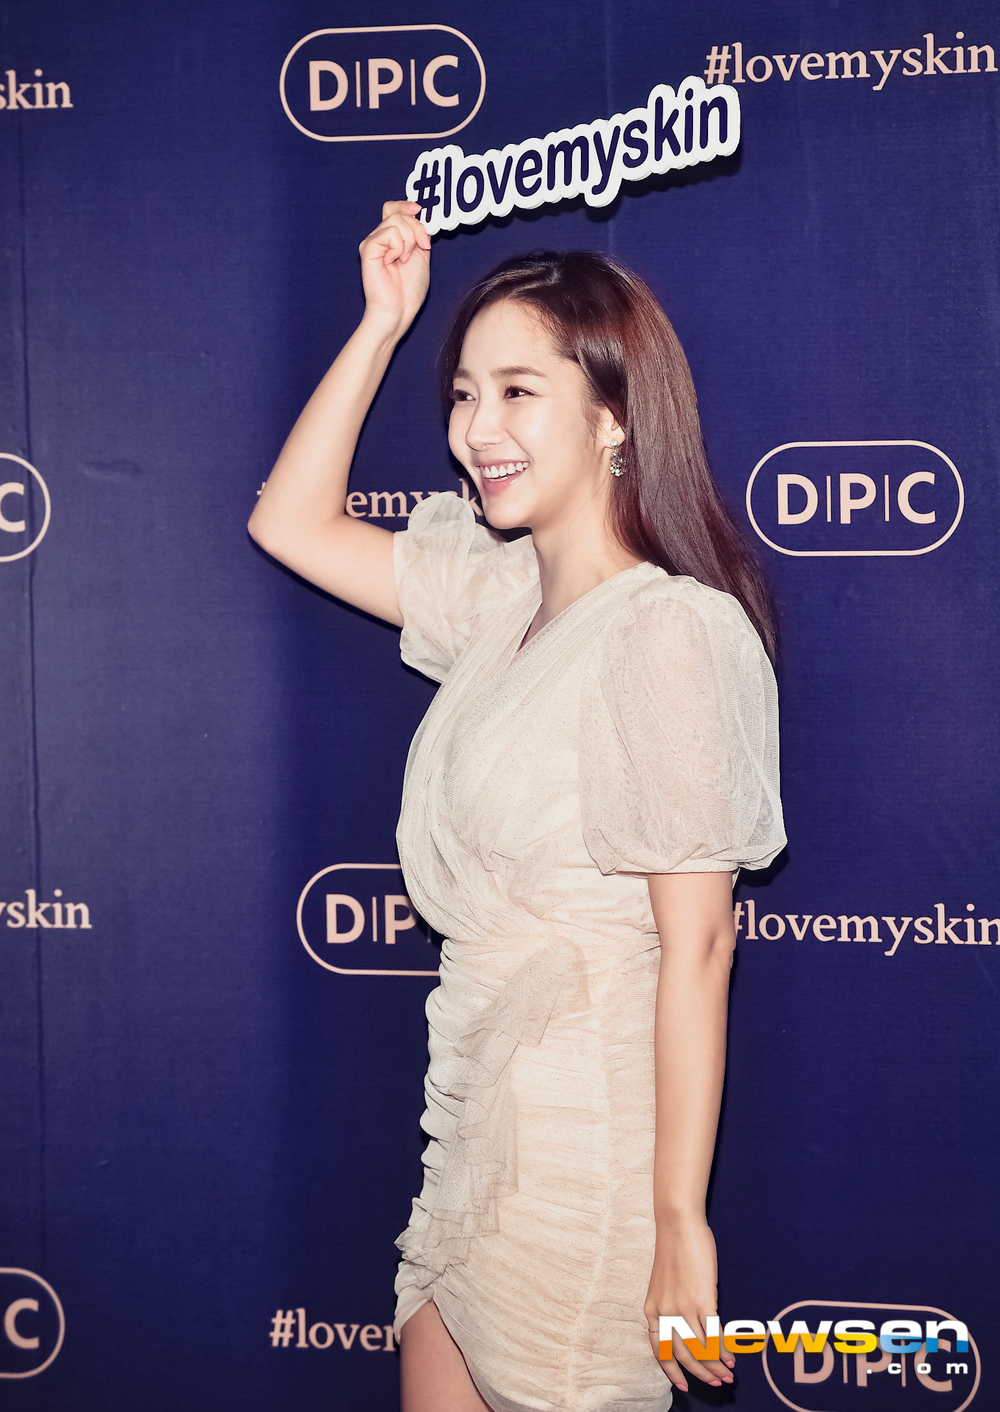 The launch event commemorating the launch of the Beauty brand DPC Skin Shot was held at Seoul Banyan Tree Club and Spa Seoul on the afternoon of February 27th.Park Min-young (DPC Beauty Device Model) is attending and posing on the day.Lee Jae-ha